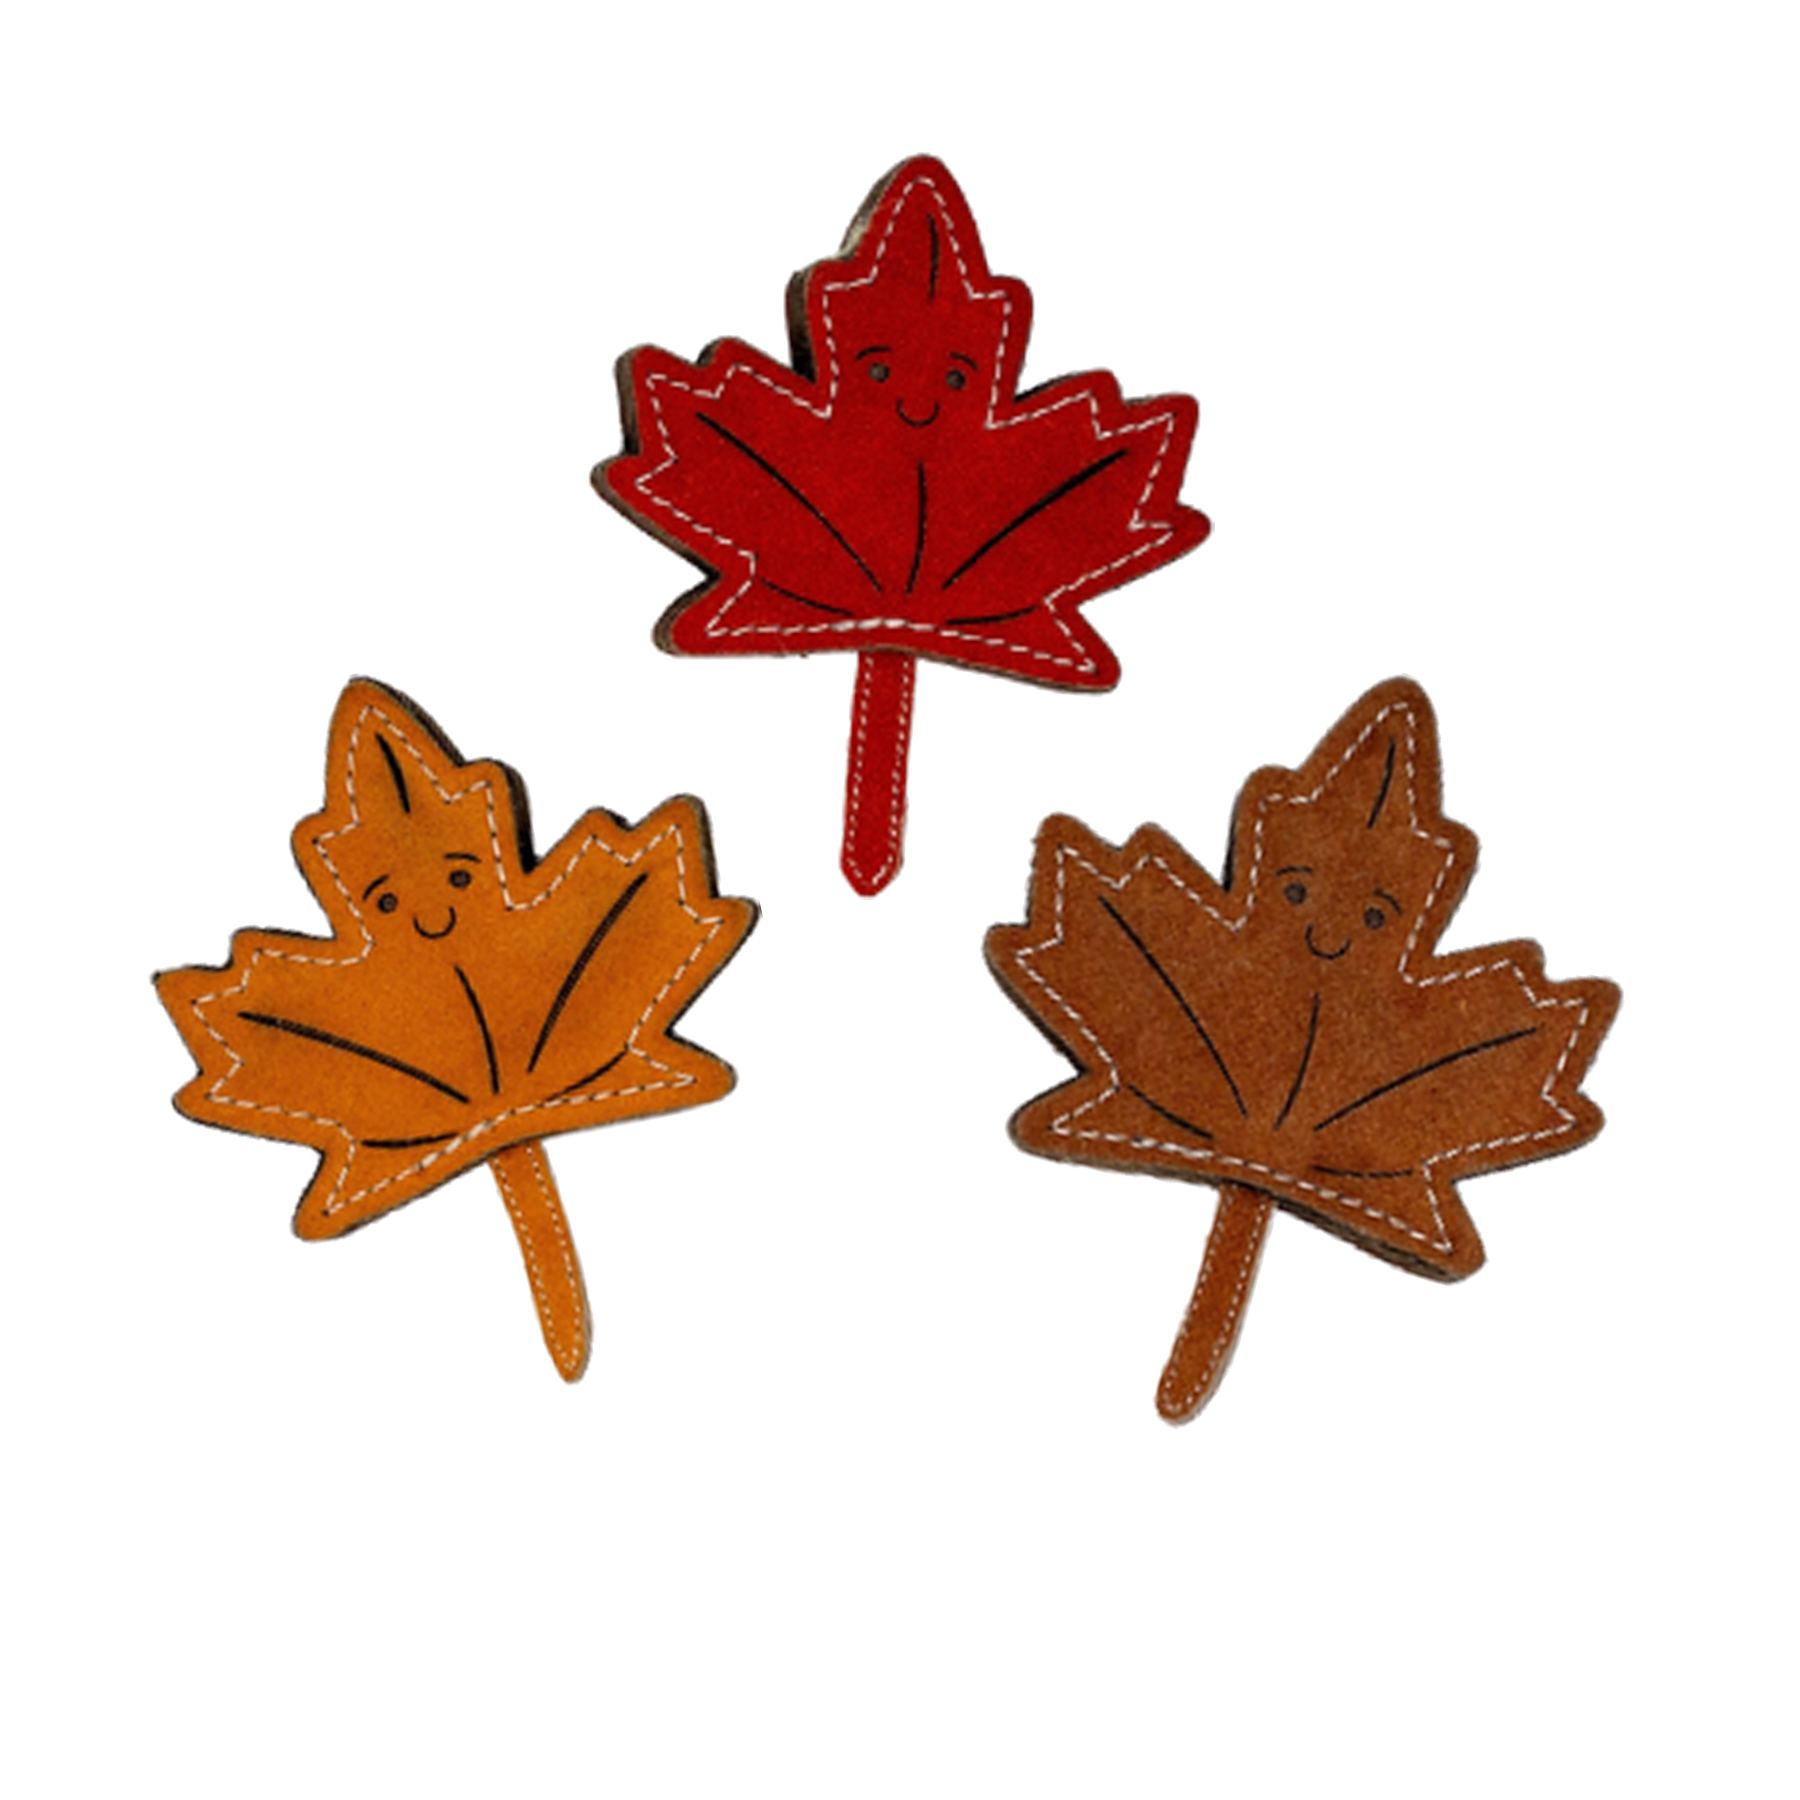 Natural Assortment of 3 Autumn Leaves